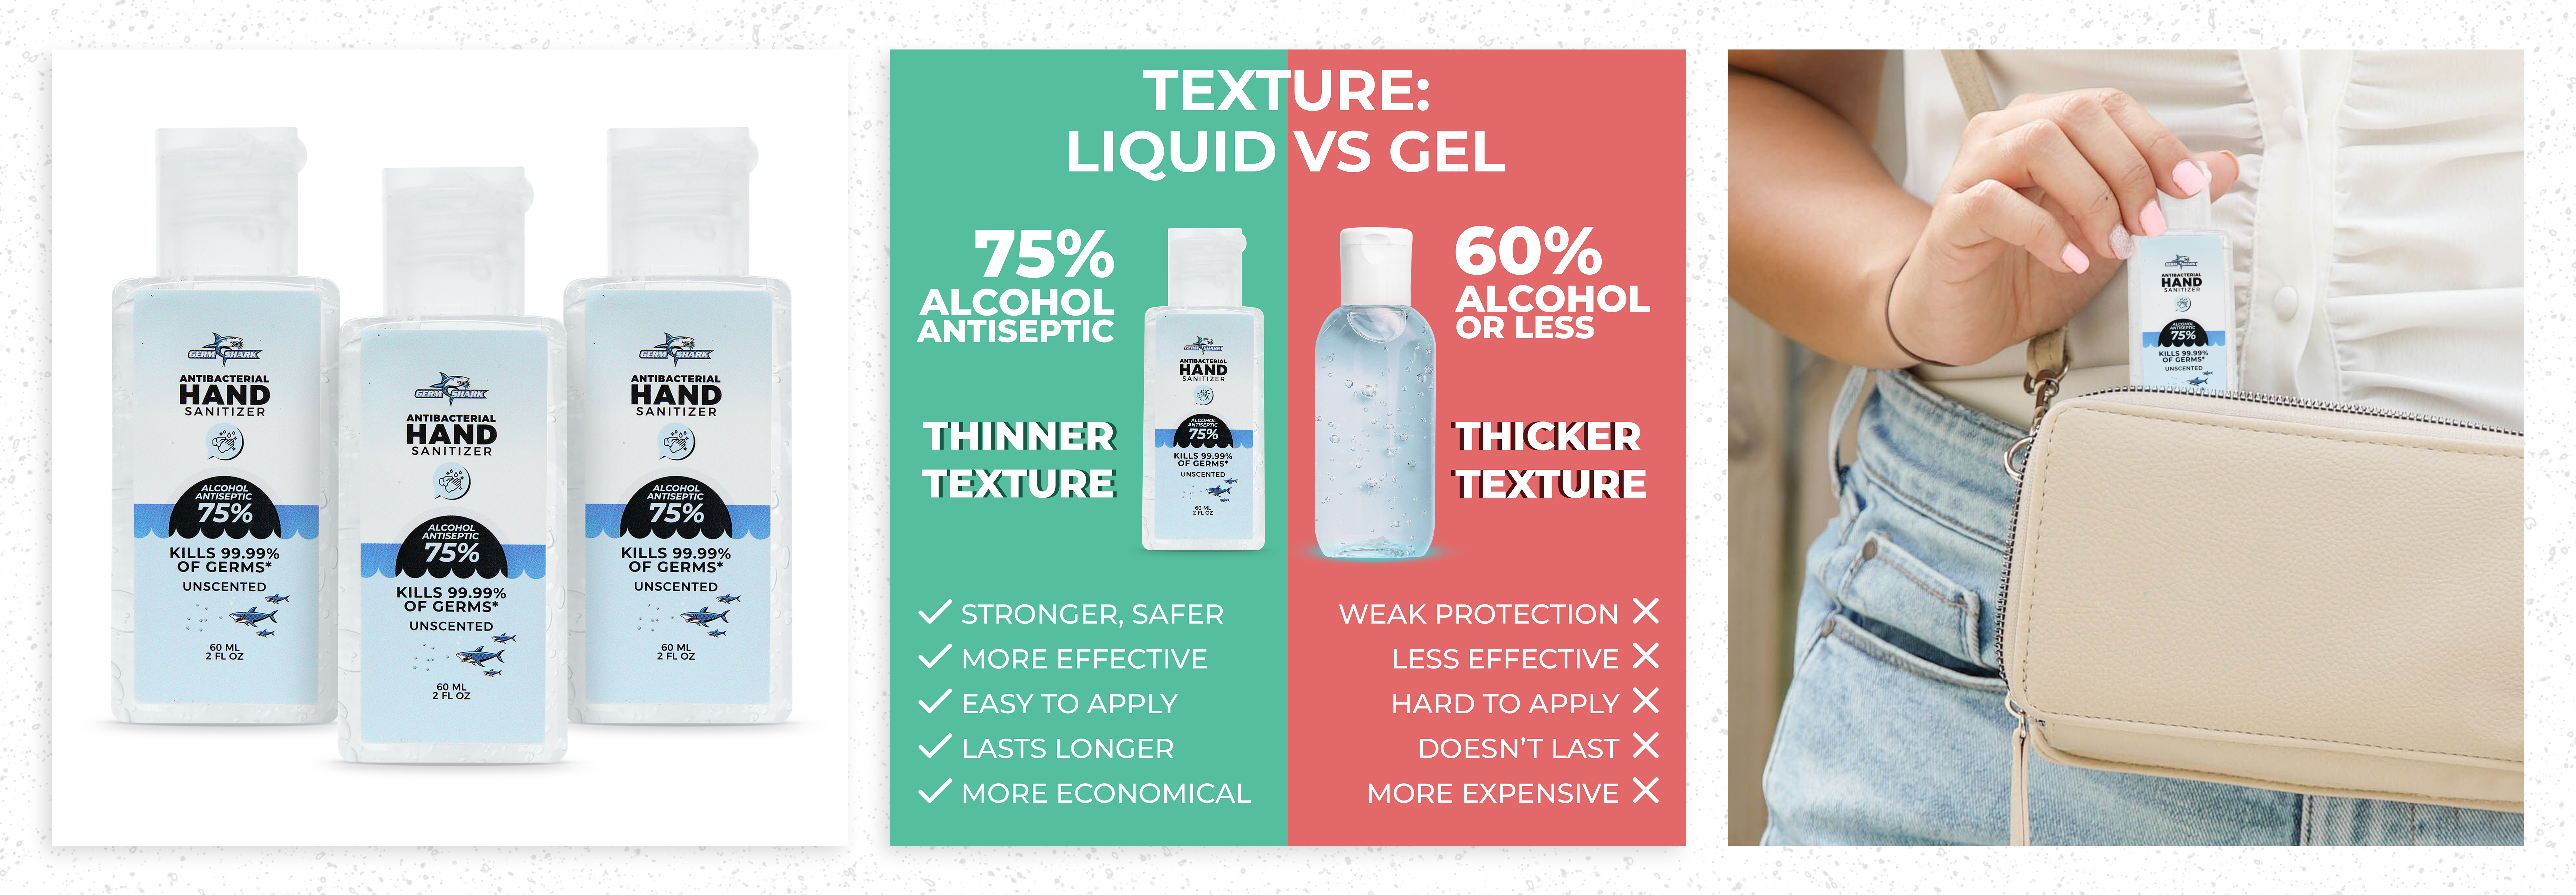 hand sanitizer in hero image, infographic, and lifestyle image that were used by Share It Studio for the competition hosted by PickFu